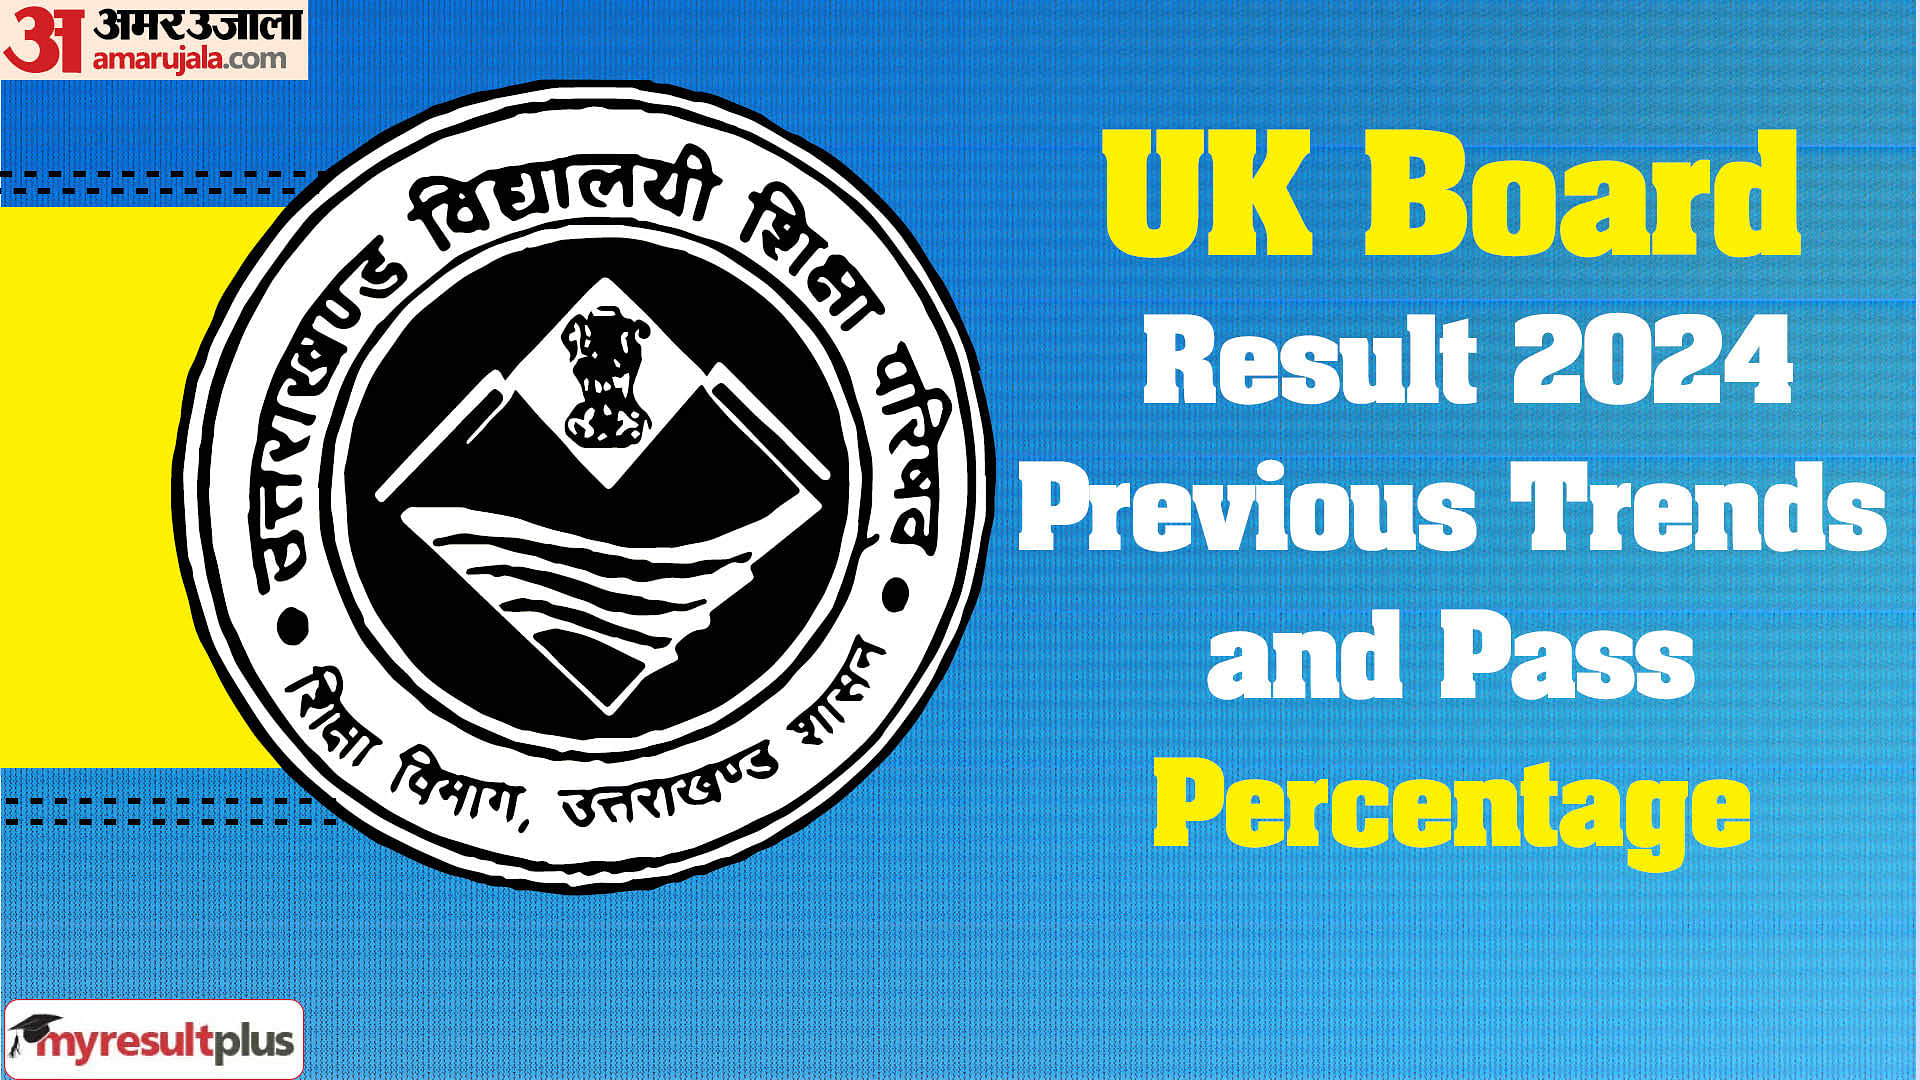 UK Board class 10th, 12th result 2024 releasing today, Read about the past trends and pass percentage here